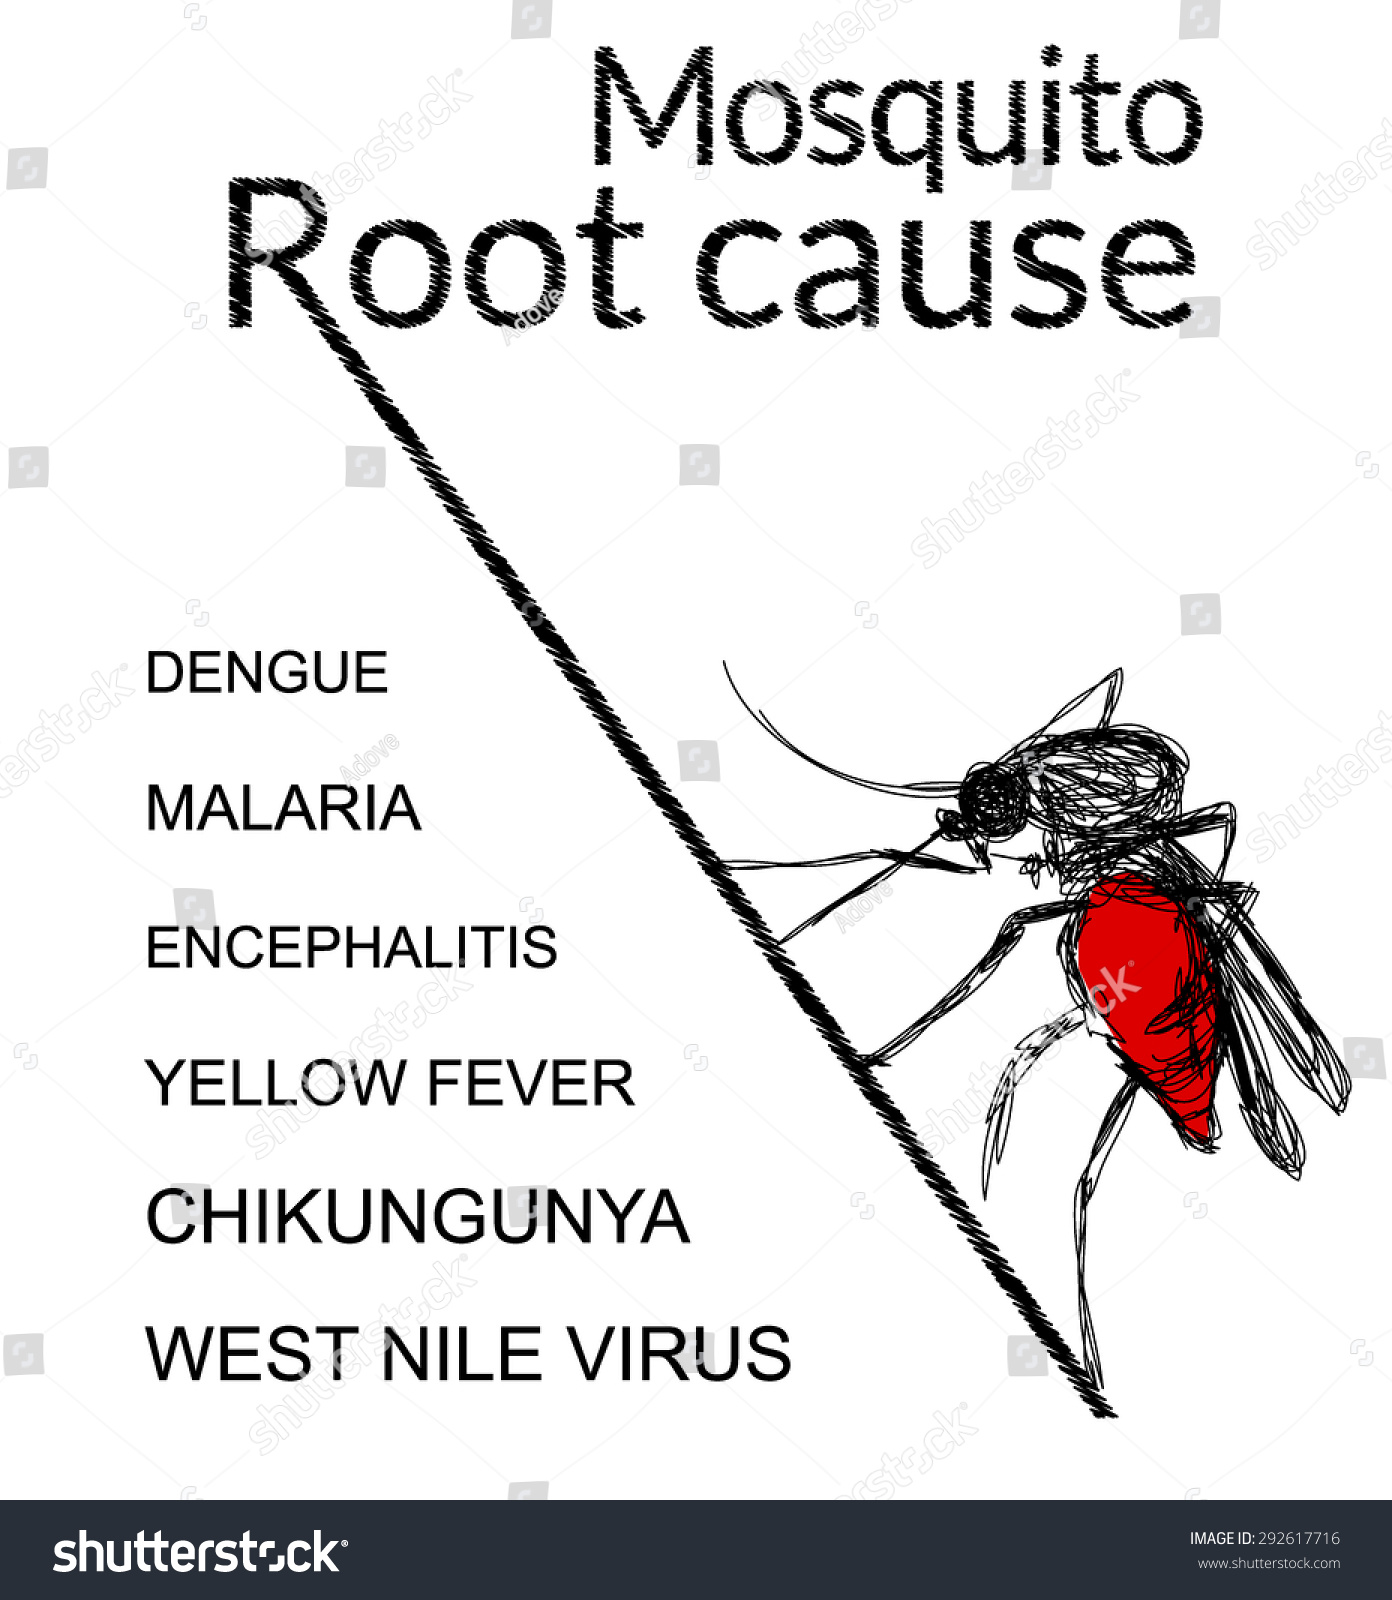 what is the root cause of malaria